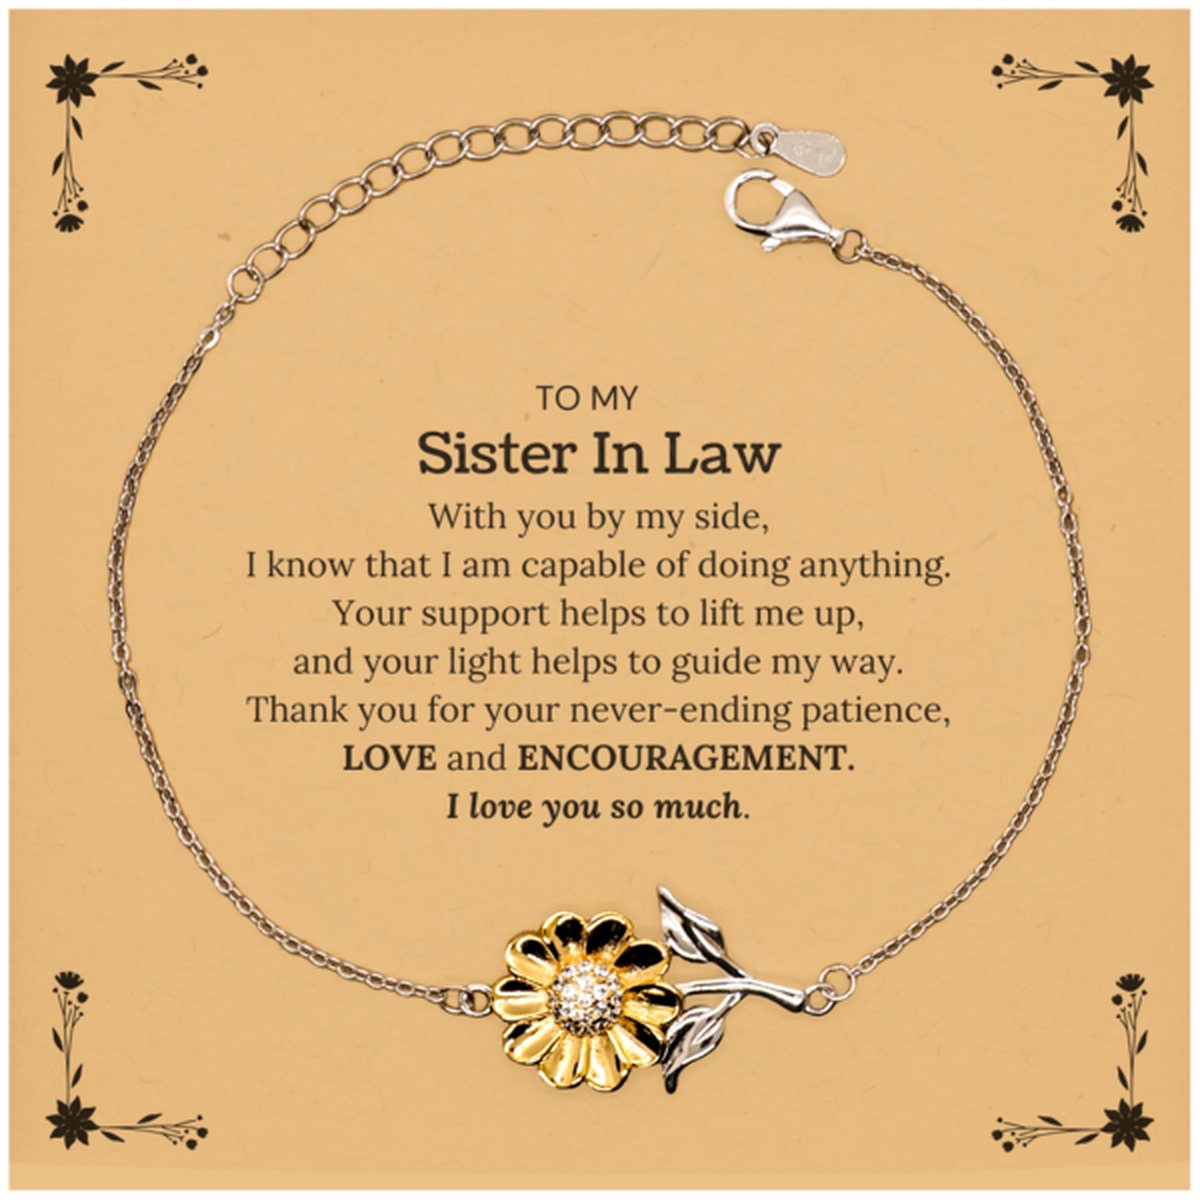 Appreciation Sister In Law Sunflower Bracelet Gifts, To My Sister In Law Birthday Christmas Wedding Keepsake Gifts for Sister In Law With you by my side, I know that I am capable of doing anything. I love you so much